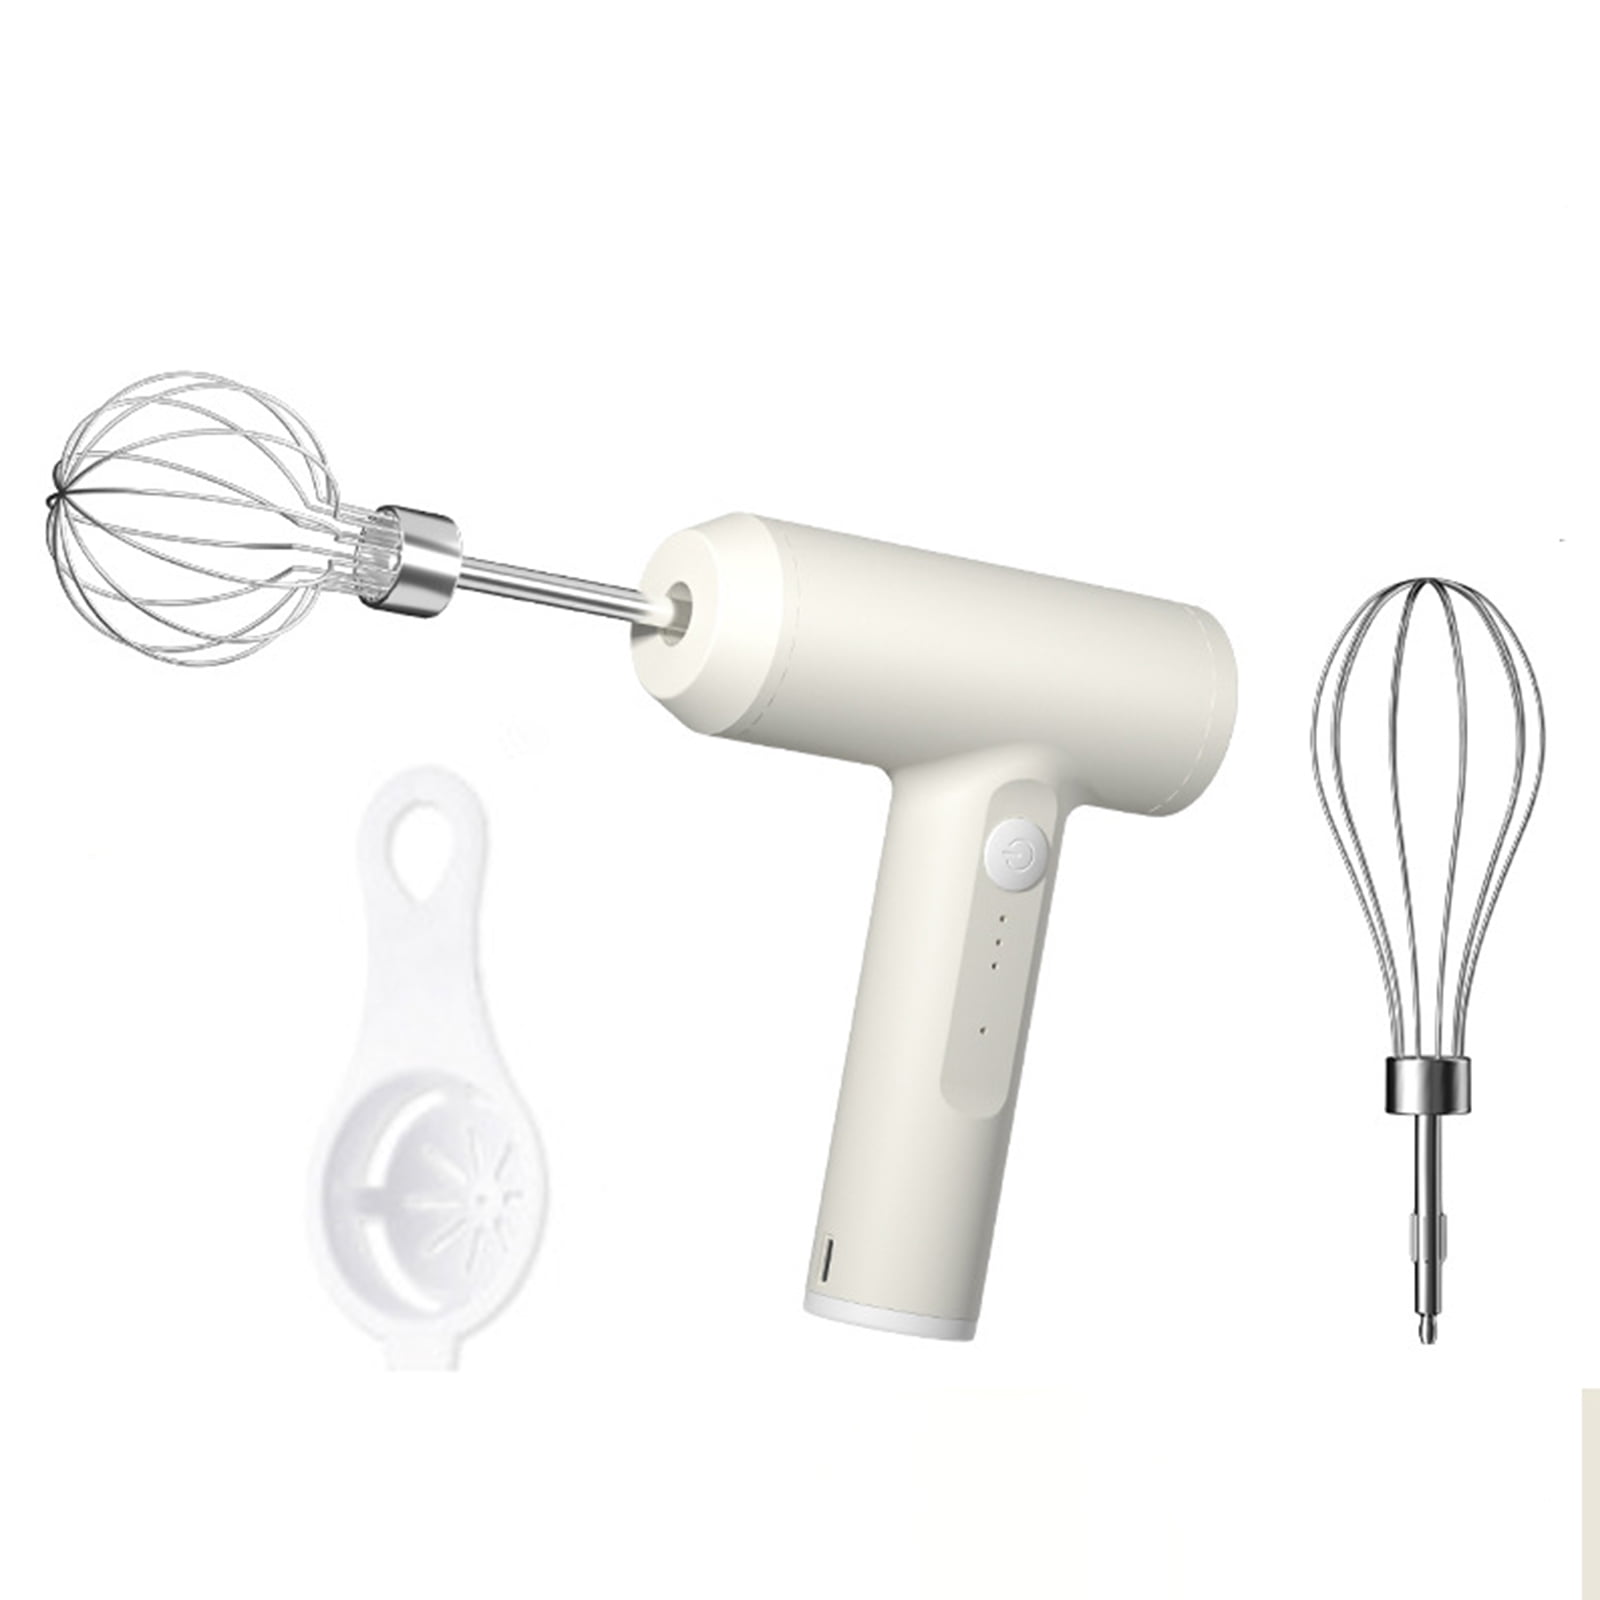 Wireless Electric Egg Beater Handheld Mini Multi-Function Milk Frother - 3  Speeds, Automatic Whisk, Dough & Egg Beater, Cake Cream Whipper